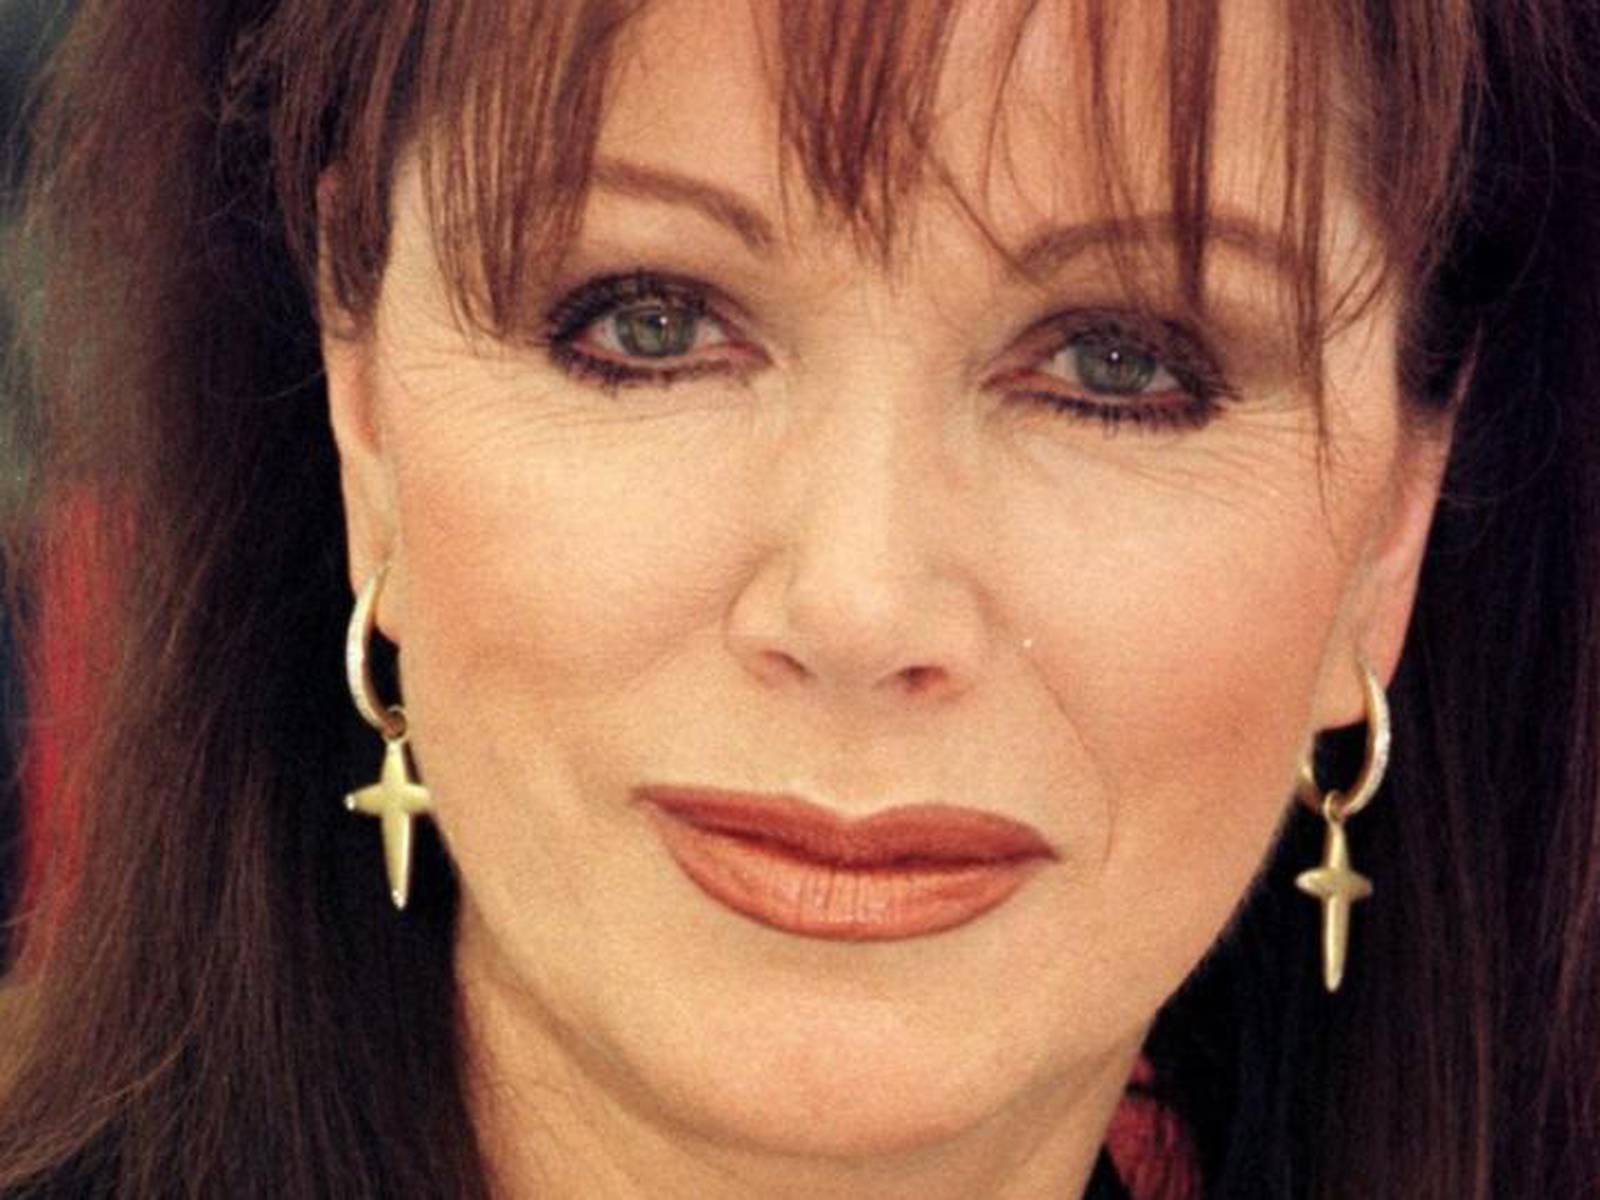 Jacqueline Boob 3gp King - Filthy and disgusting? Thank you Jackie Collins â€“ The Irish Times